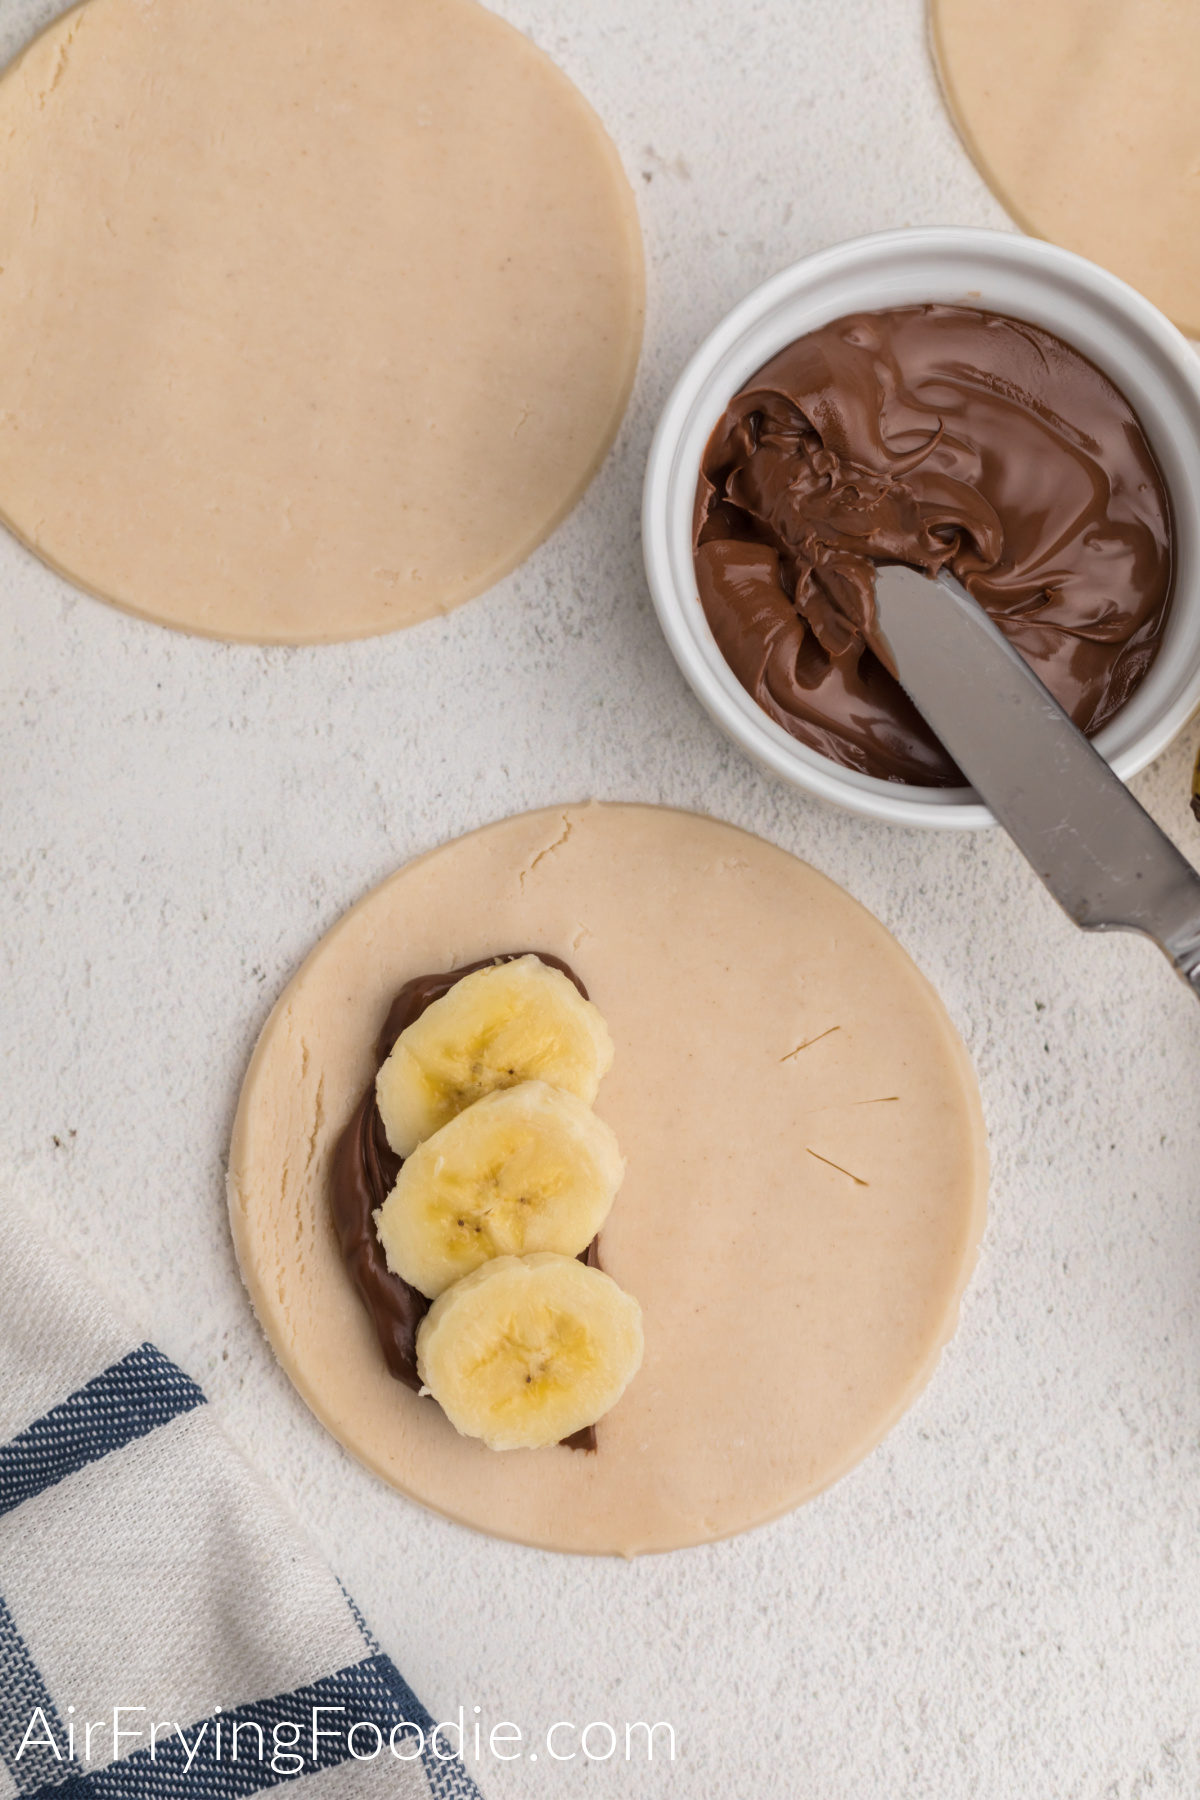 Sliced bananas on top of nutella on a pie crust.